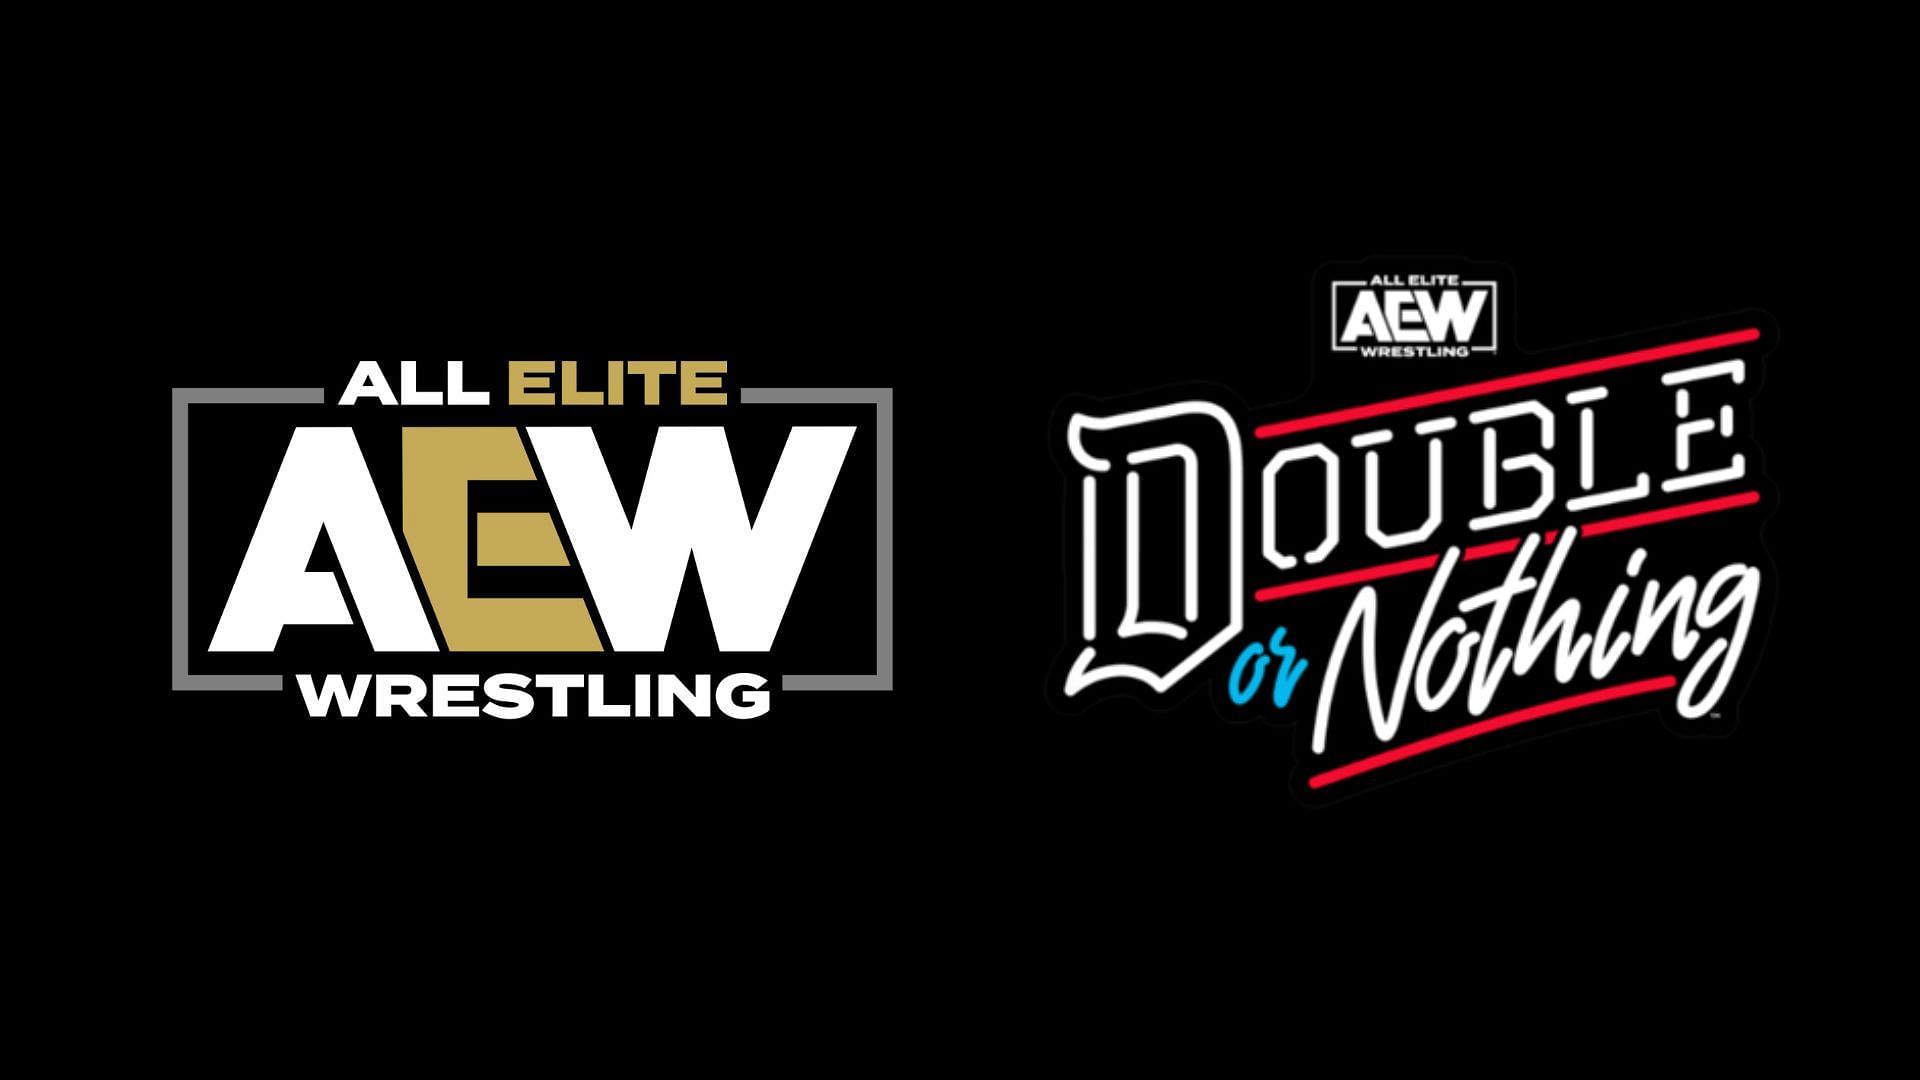 Double or Nothing is the next big pay-per-view of All Elite Wrestling